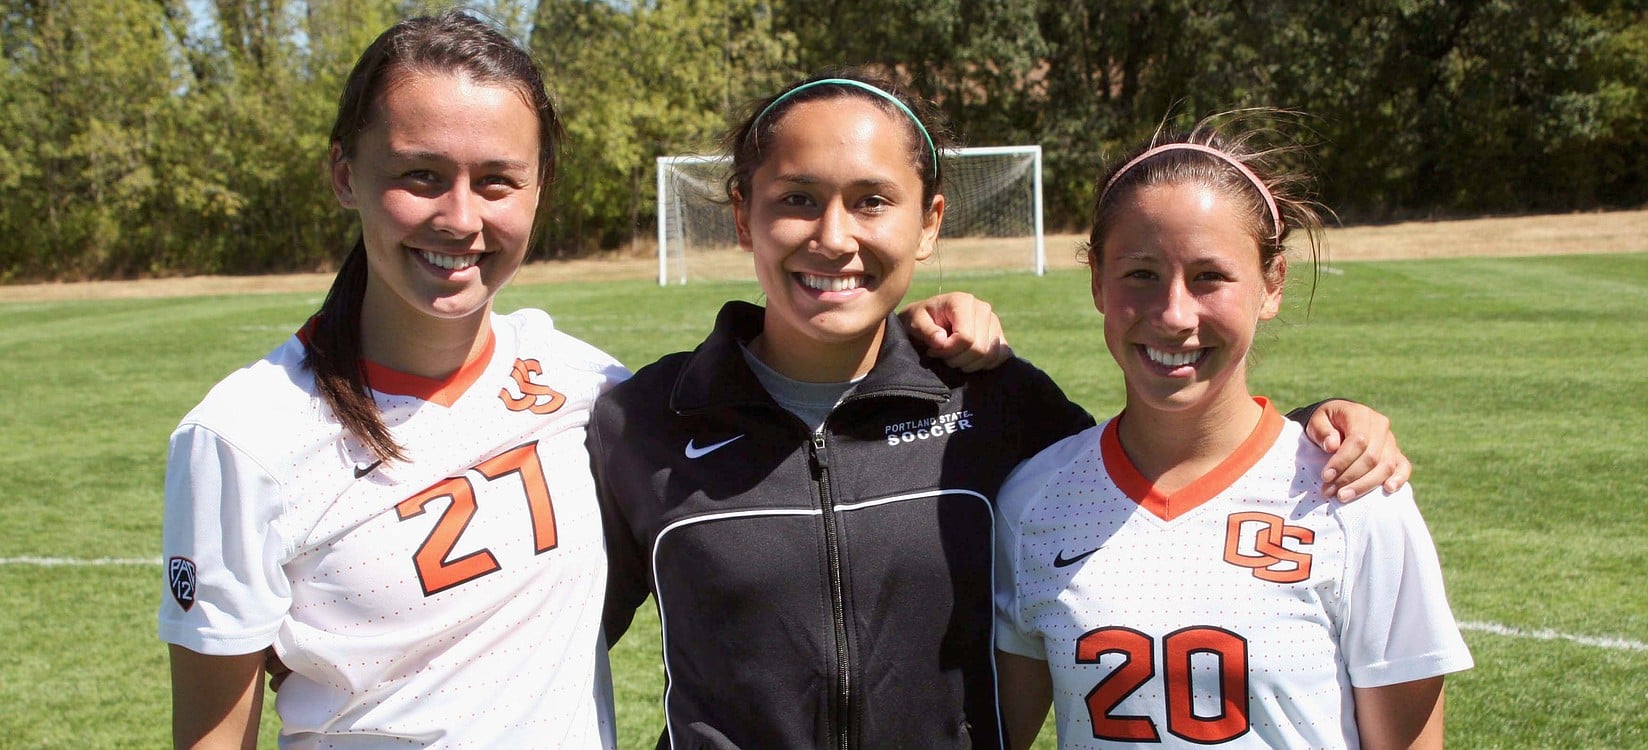 Olivia Lovell, Eryn Brown and Brittney Oljar (left to right) reconnected on the soccer field Friday, at Tualatin Hills Recreation Park in Beaverton, Ore. These three Camas High School graduates helped the Papermakers finish in third place at state in 2009.